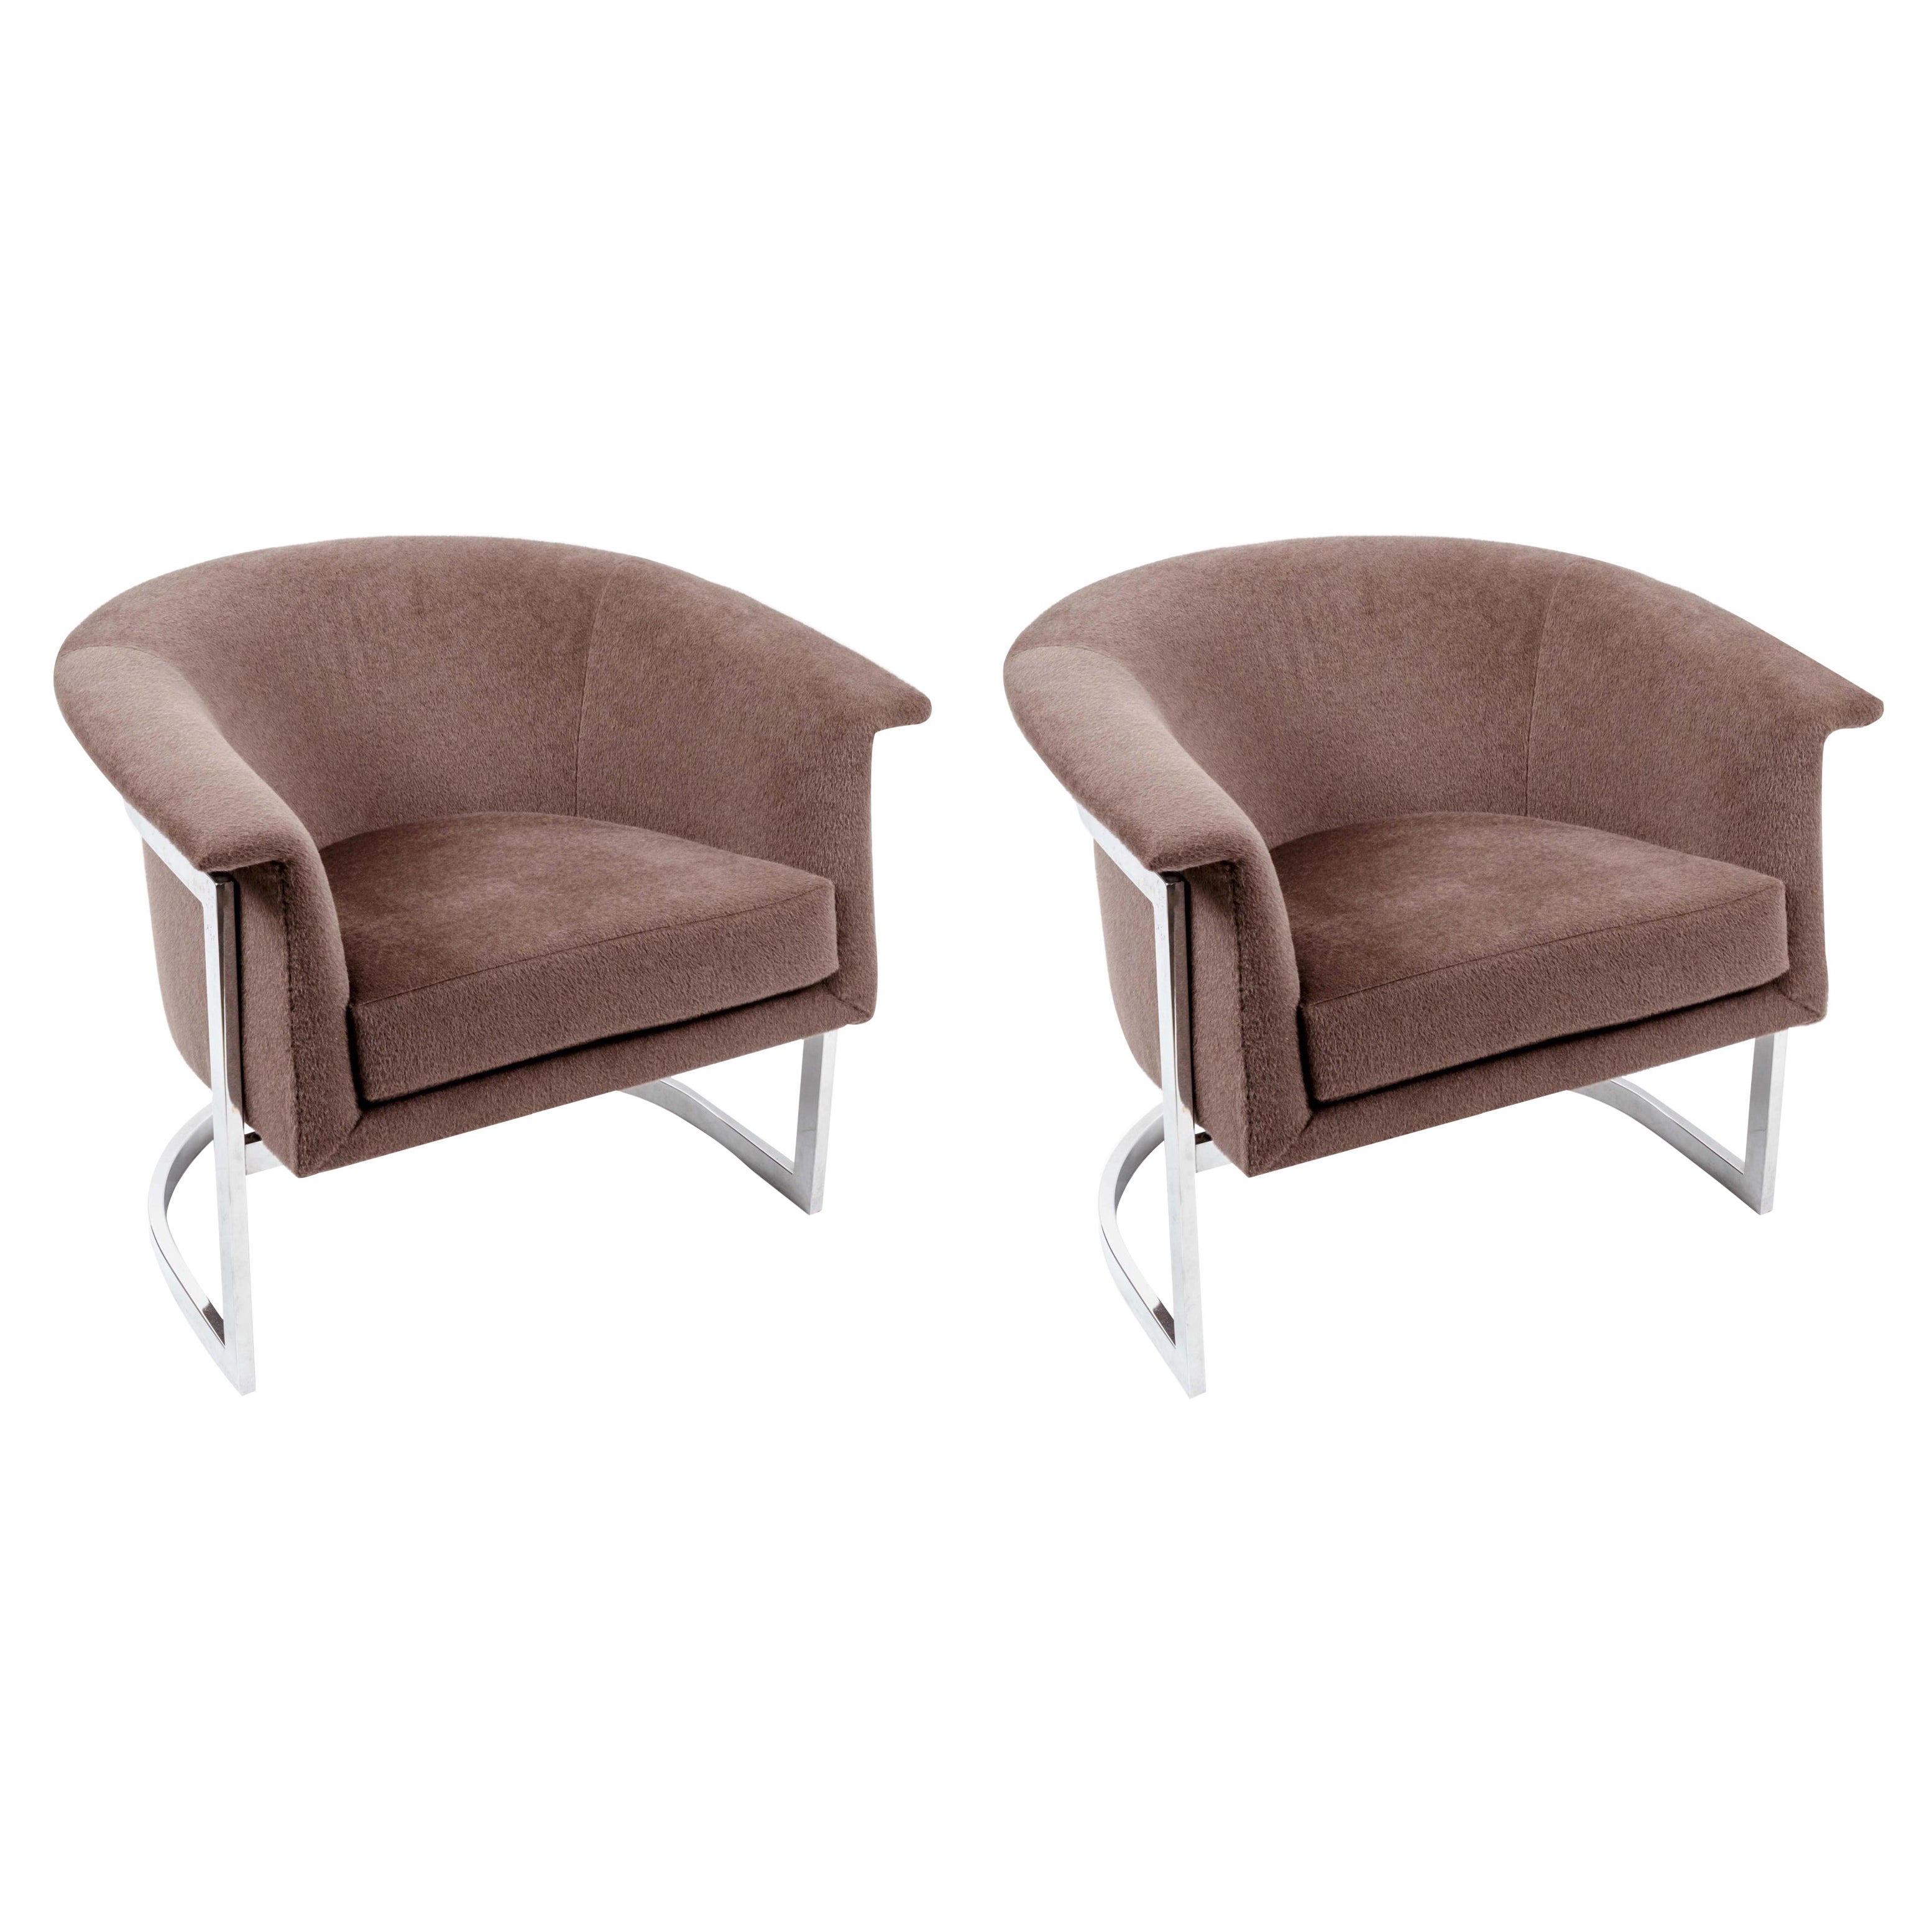 Pair of Chromed Steel Upholstered Lounge Chairs in the Style of Milo Baughman For Sale